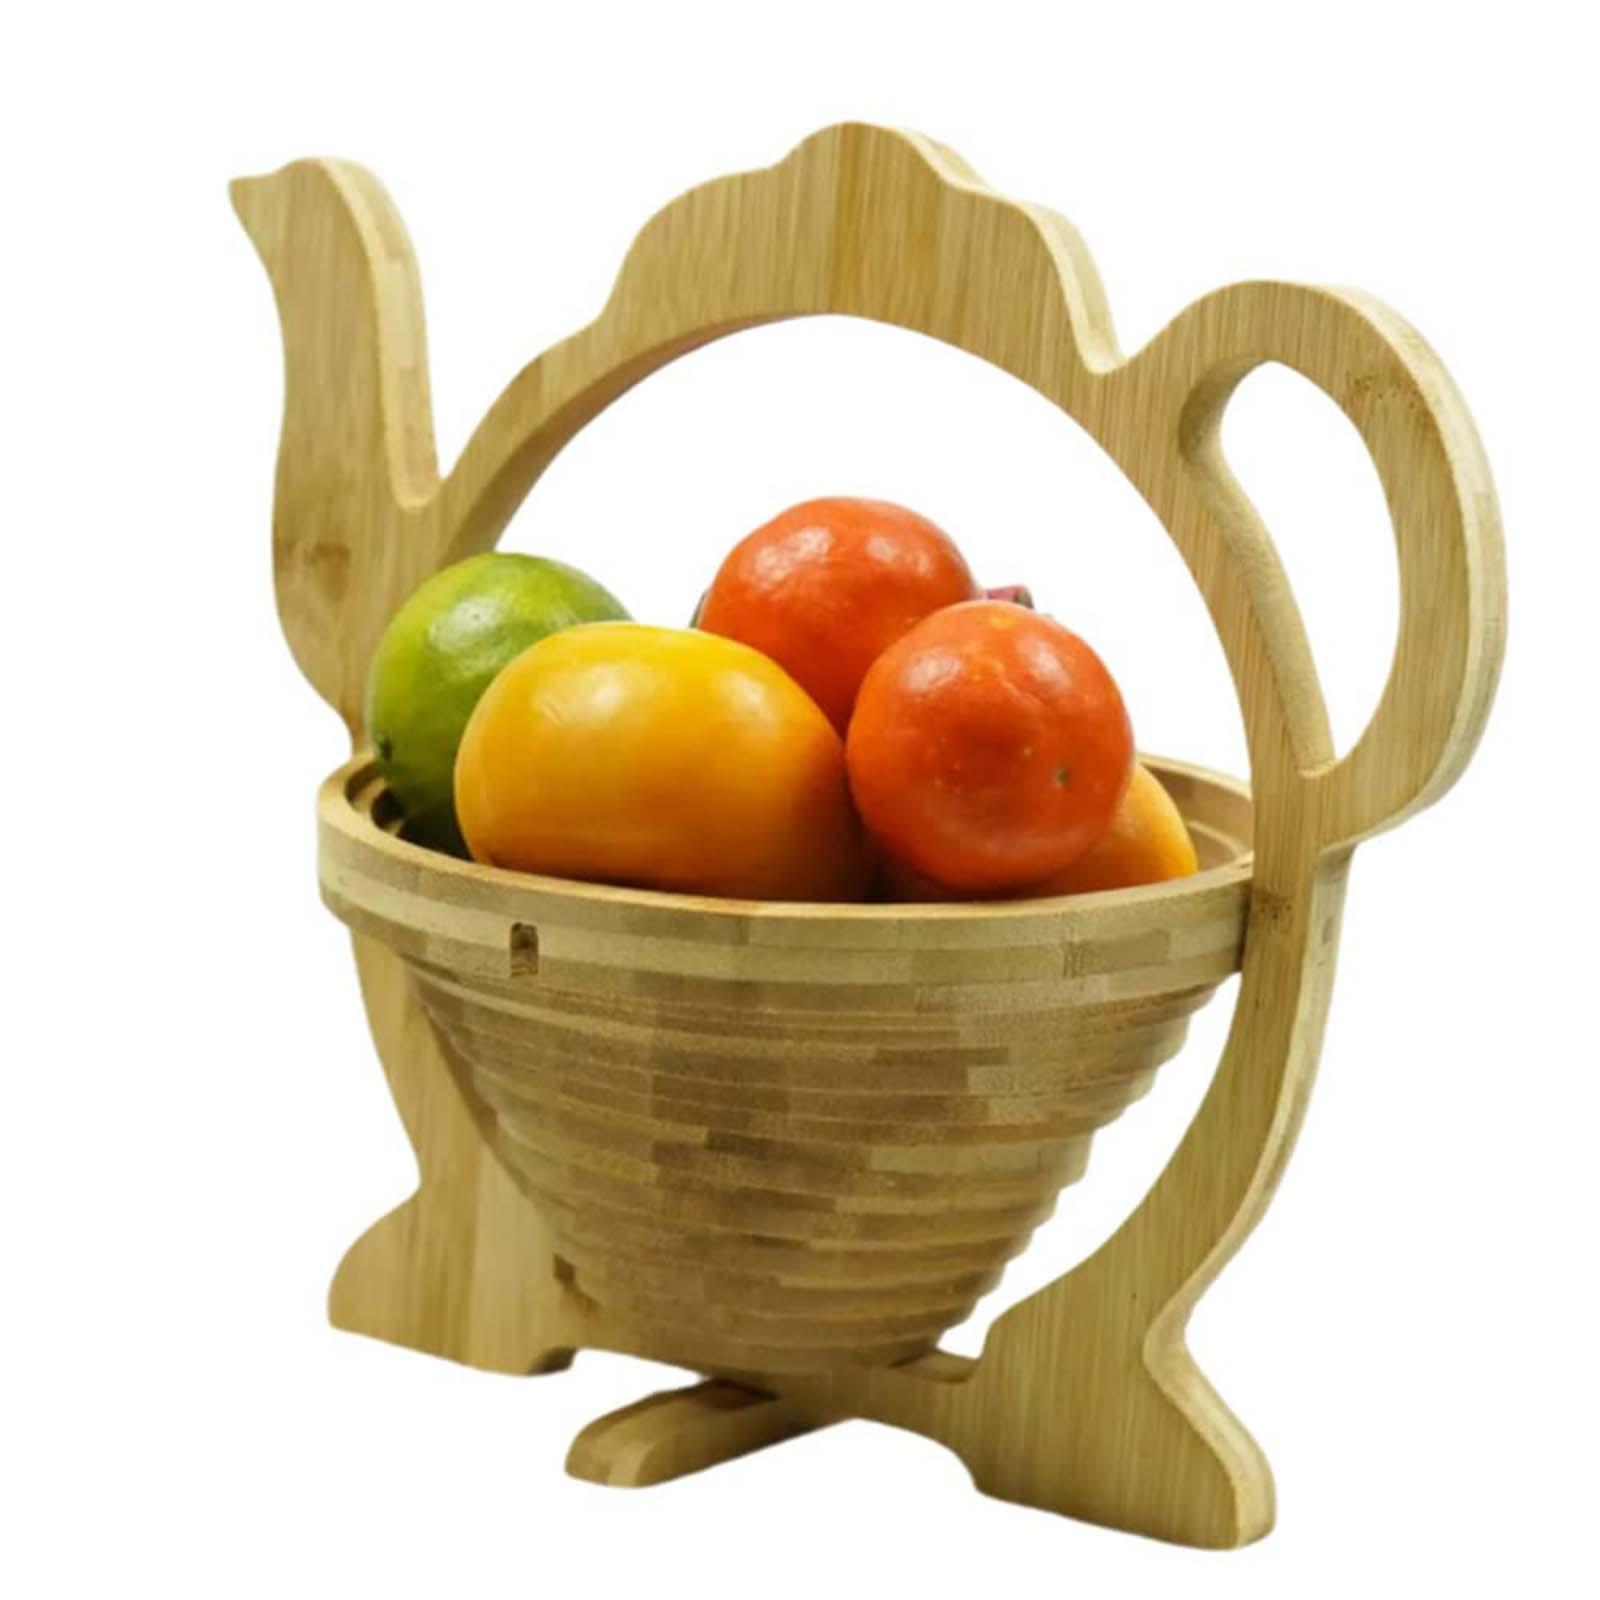 Fruit Basket Collapsible Snack Storage Tray Decorative for Home Kitchen Teapot